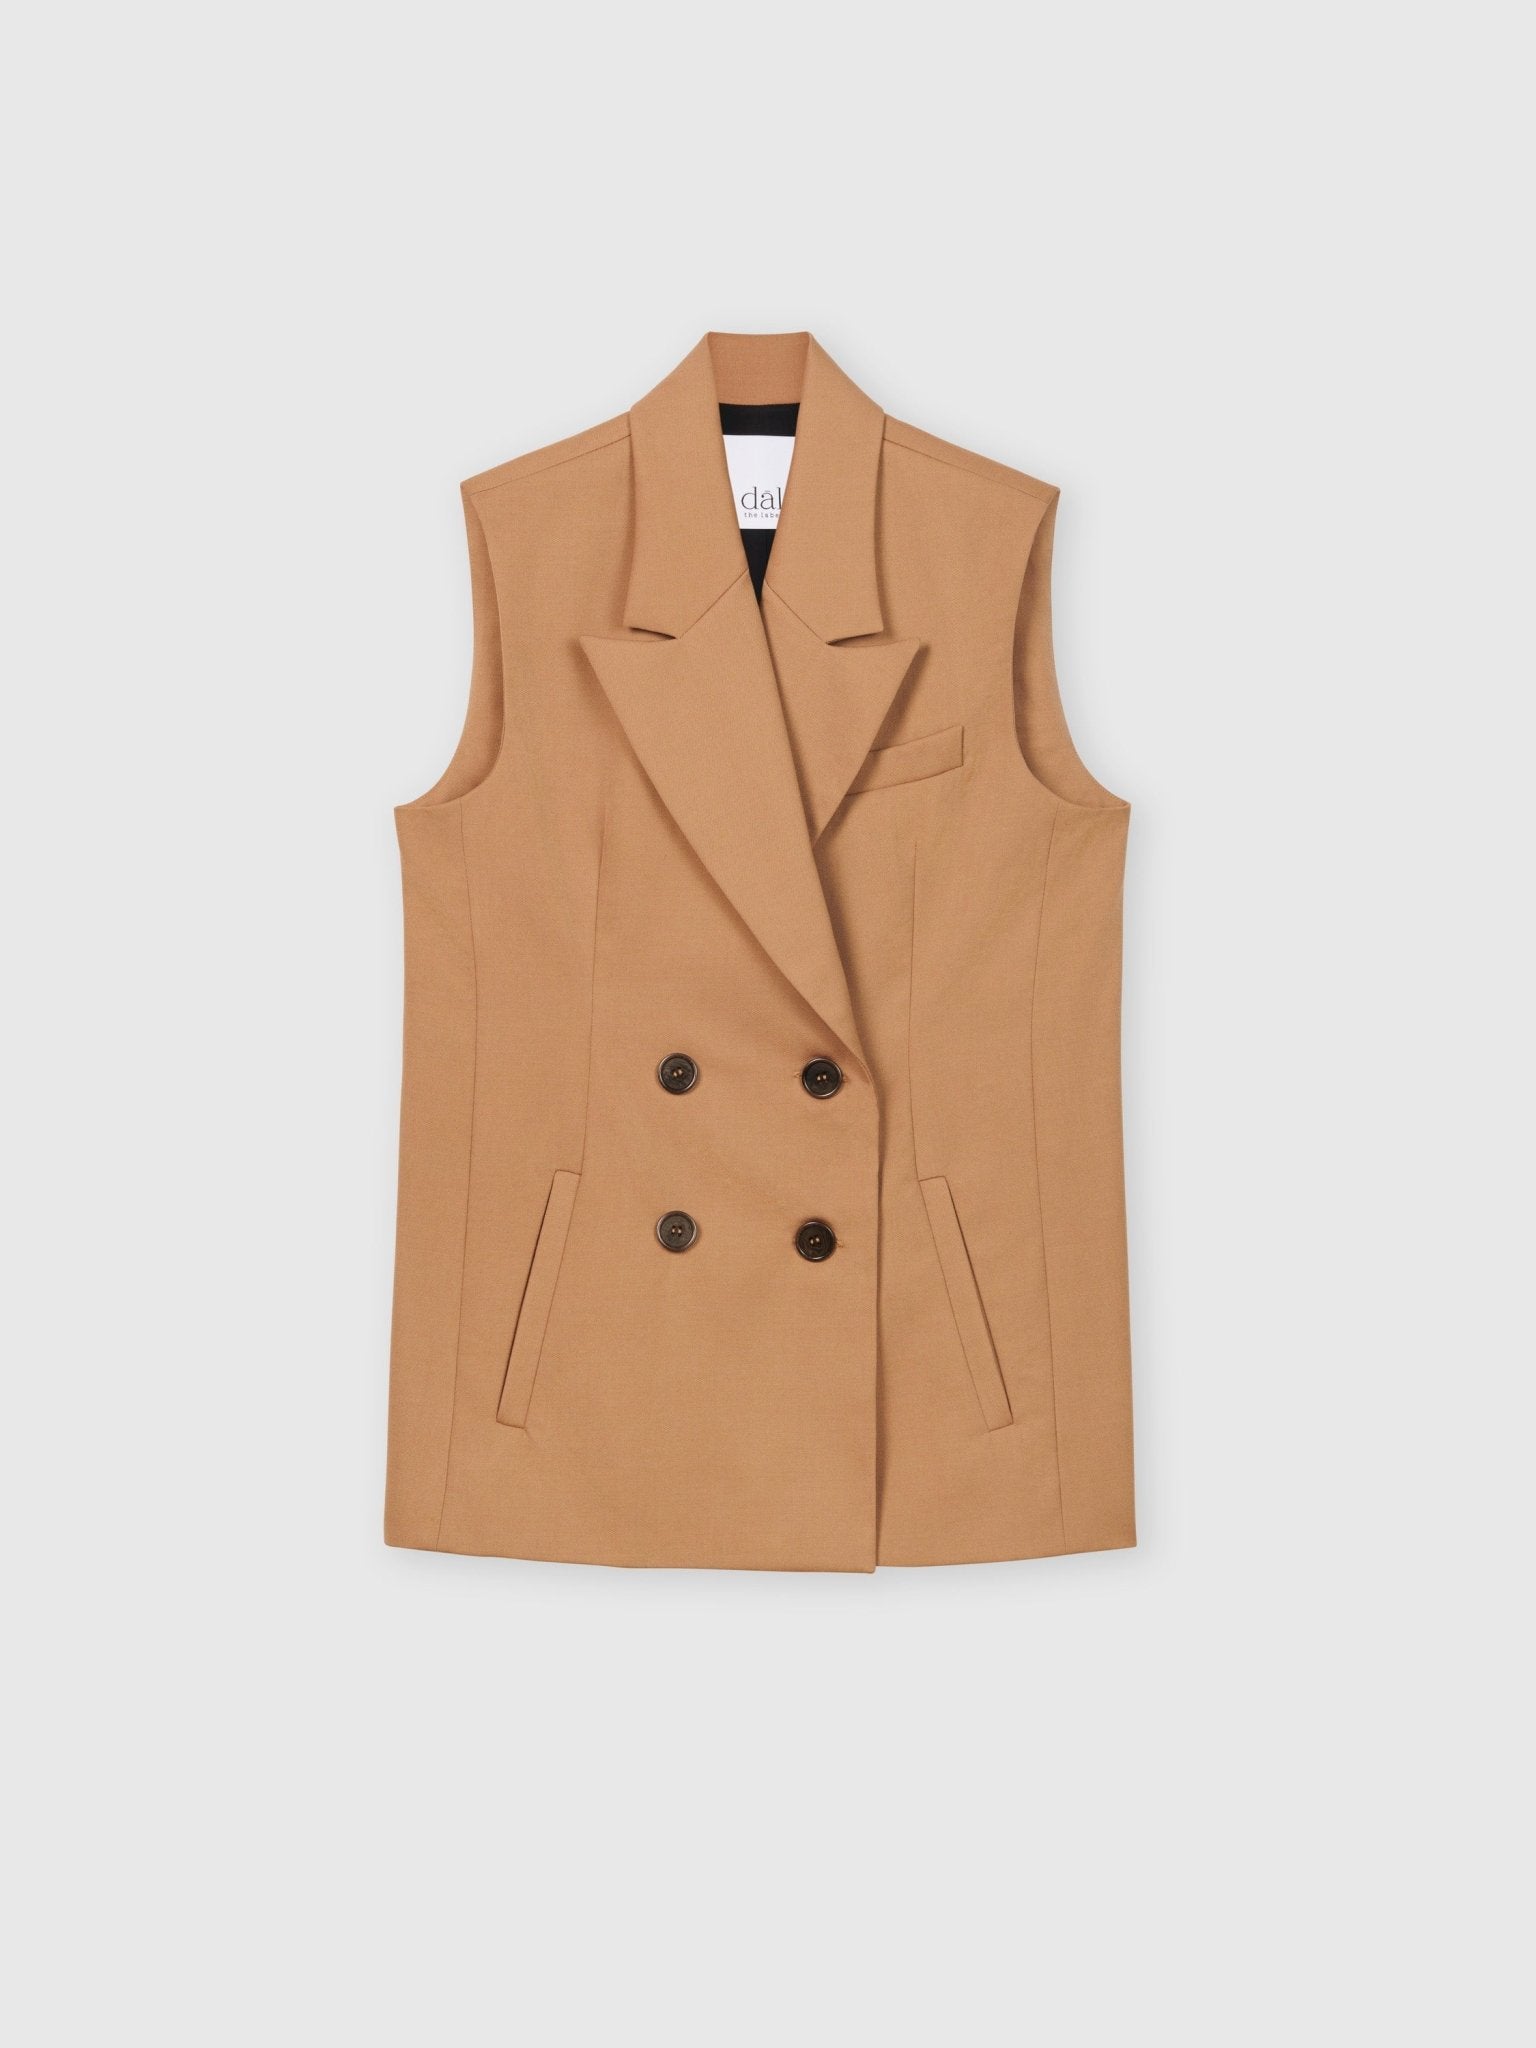 Wool Double-Breasted Vest - dāl the label-Toffee